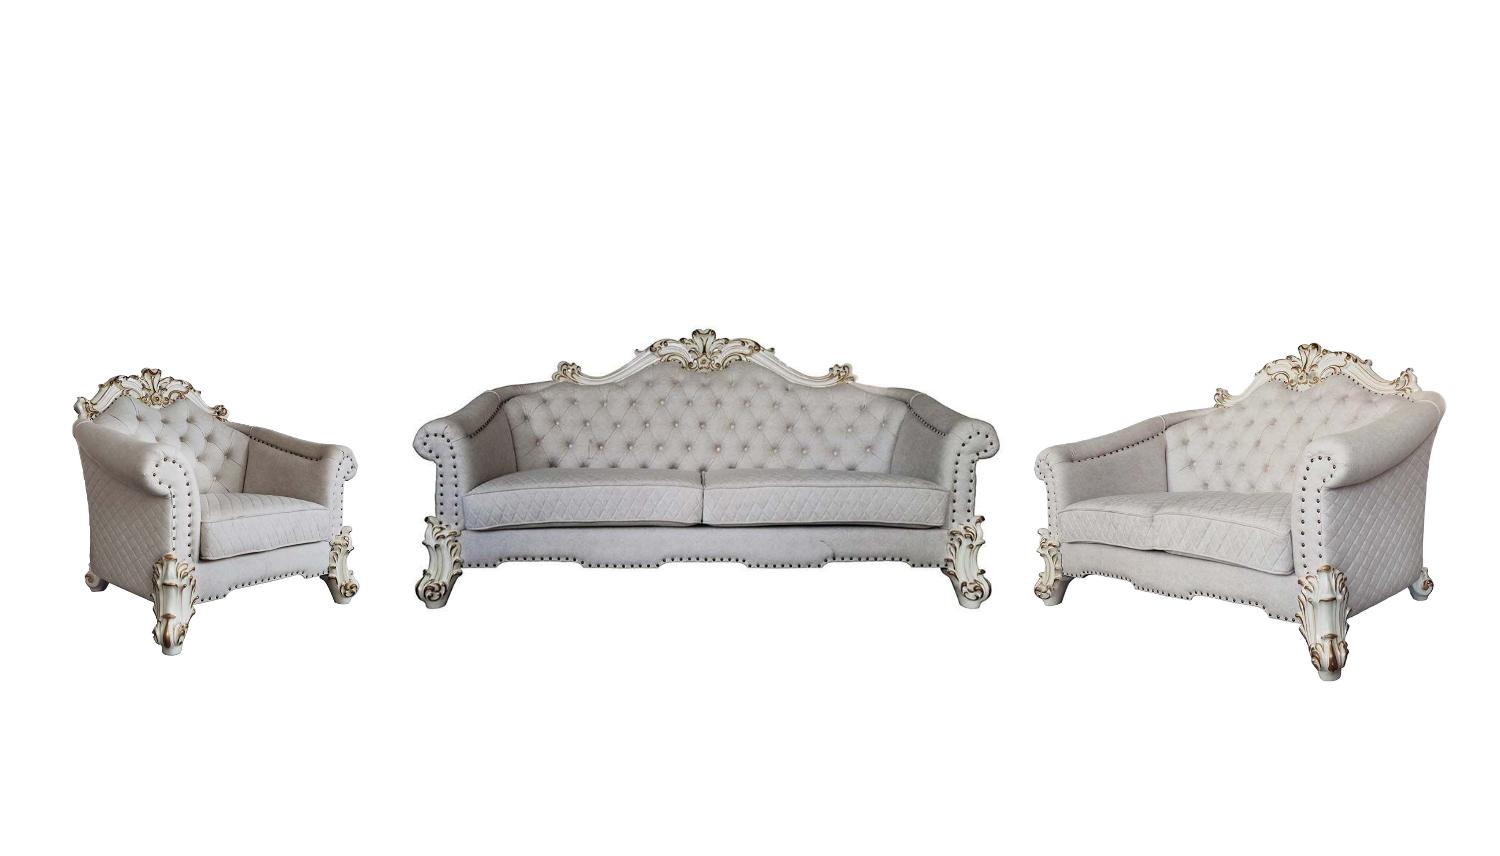 Classic, Traditional Sofa Loveseat and Chair Set Vendom II LV01329-3pcs in Ivory, Beige Fabric